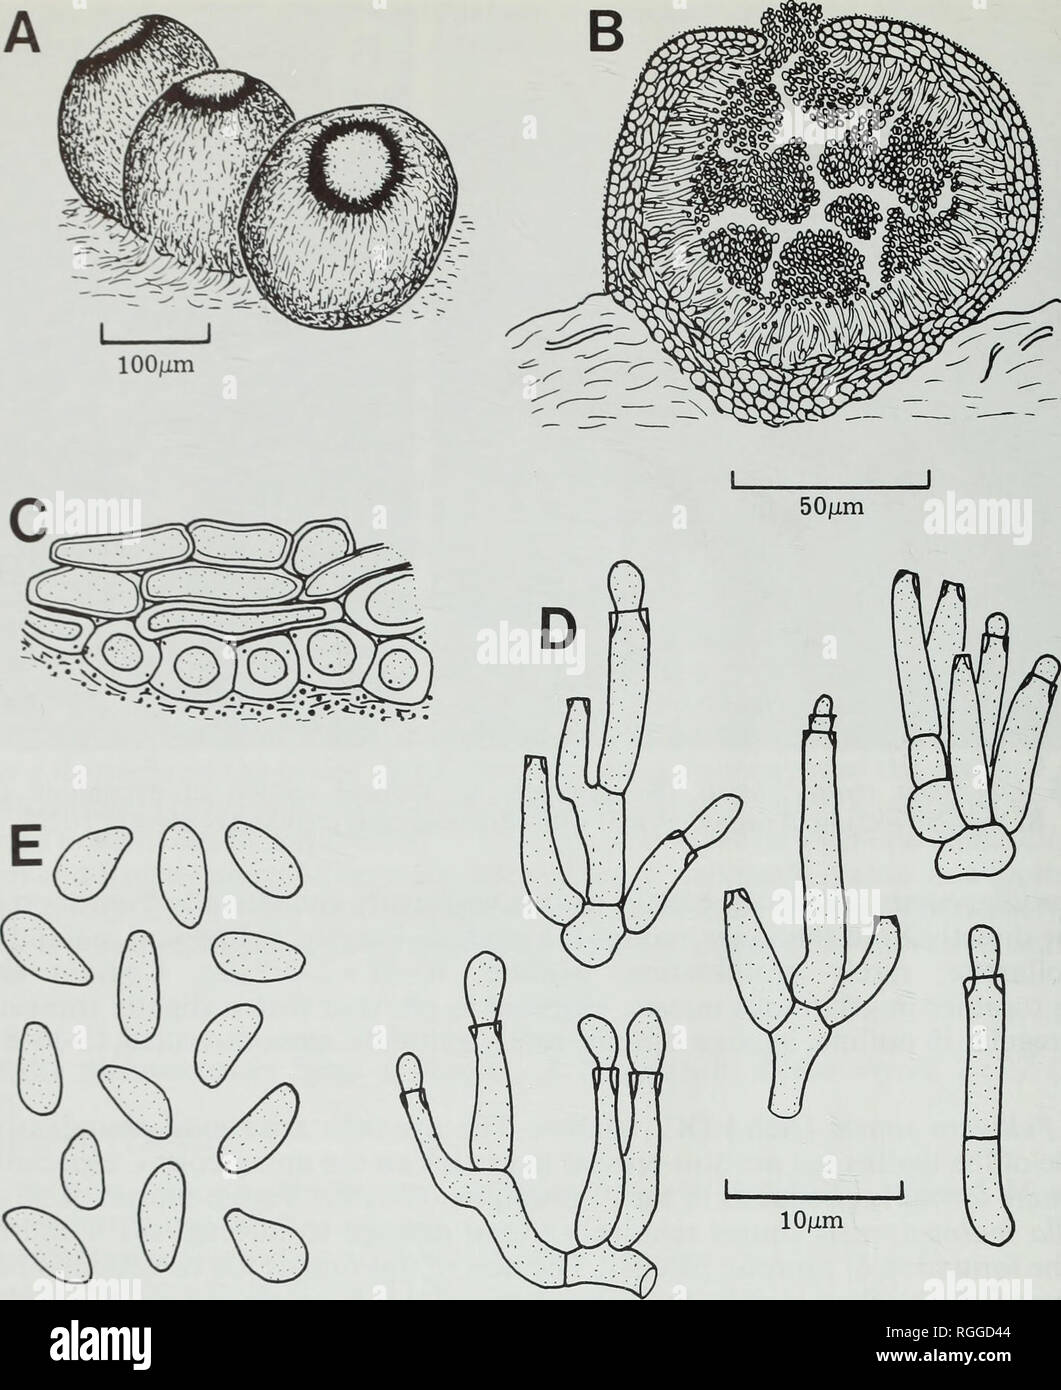 . Bulletin of the British Museum (Natural History). Botany; Botany. 32 D. L. HAWKSWORTH. Fig. 17 Libertiella malmeydensis (K—isotype). A, Pycnidia on the host thallus showing the deeply pigmented ring around the ostiole. B, Vertical section of pycnidium. C, Vertical section of pycnidial wall with granular encrustations on the outer cells. D, Conidiophores and conidiogenous cells. E, Conidia. 1880.' There can consequently be no doubt that Spegazzini's article, which was an appendix to that of Roumeguere, appeared before the printing and distribution of the part ofGrevillea including Cooke's pap Stock Photo